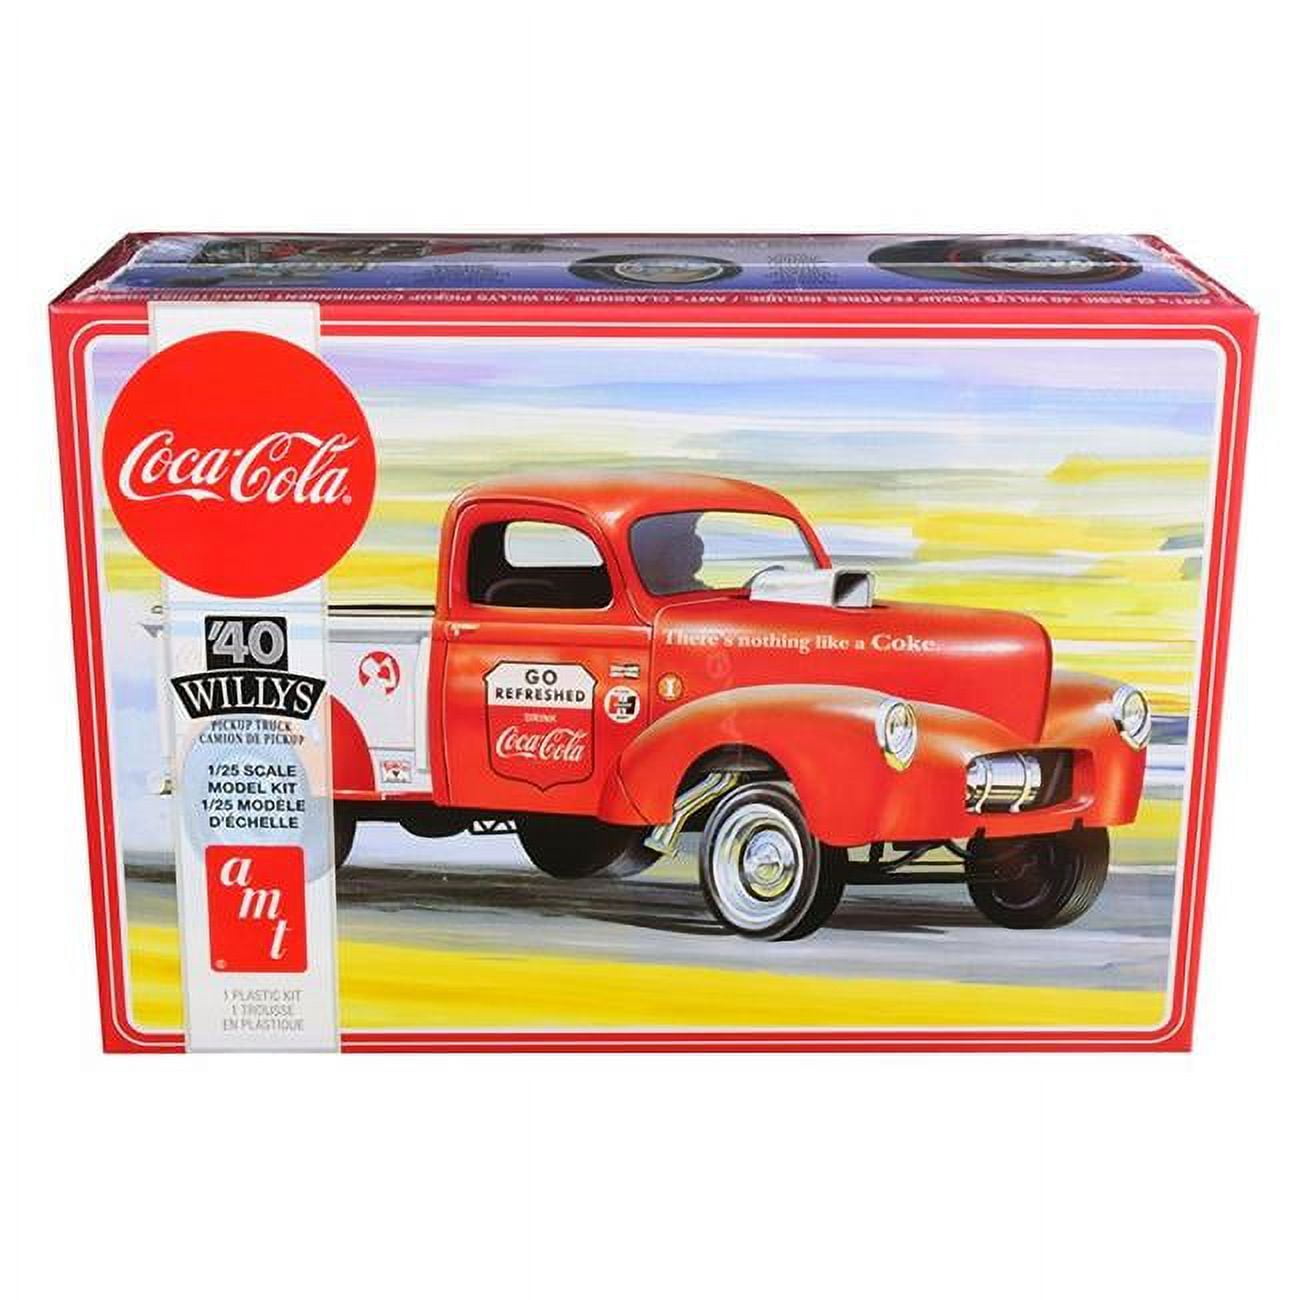 1145m Skill 3 Model Kit 1940 Willys Gasser Pickup Truck Coca-cola 1 By 25 Scale Model